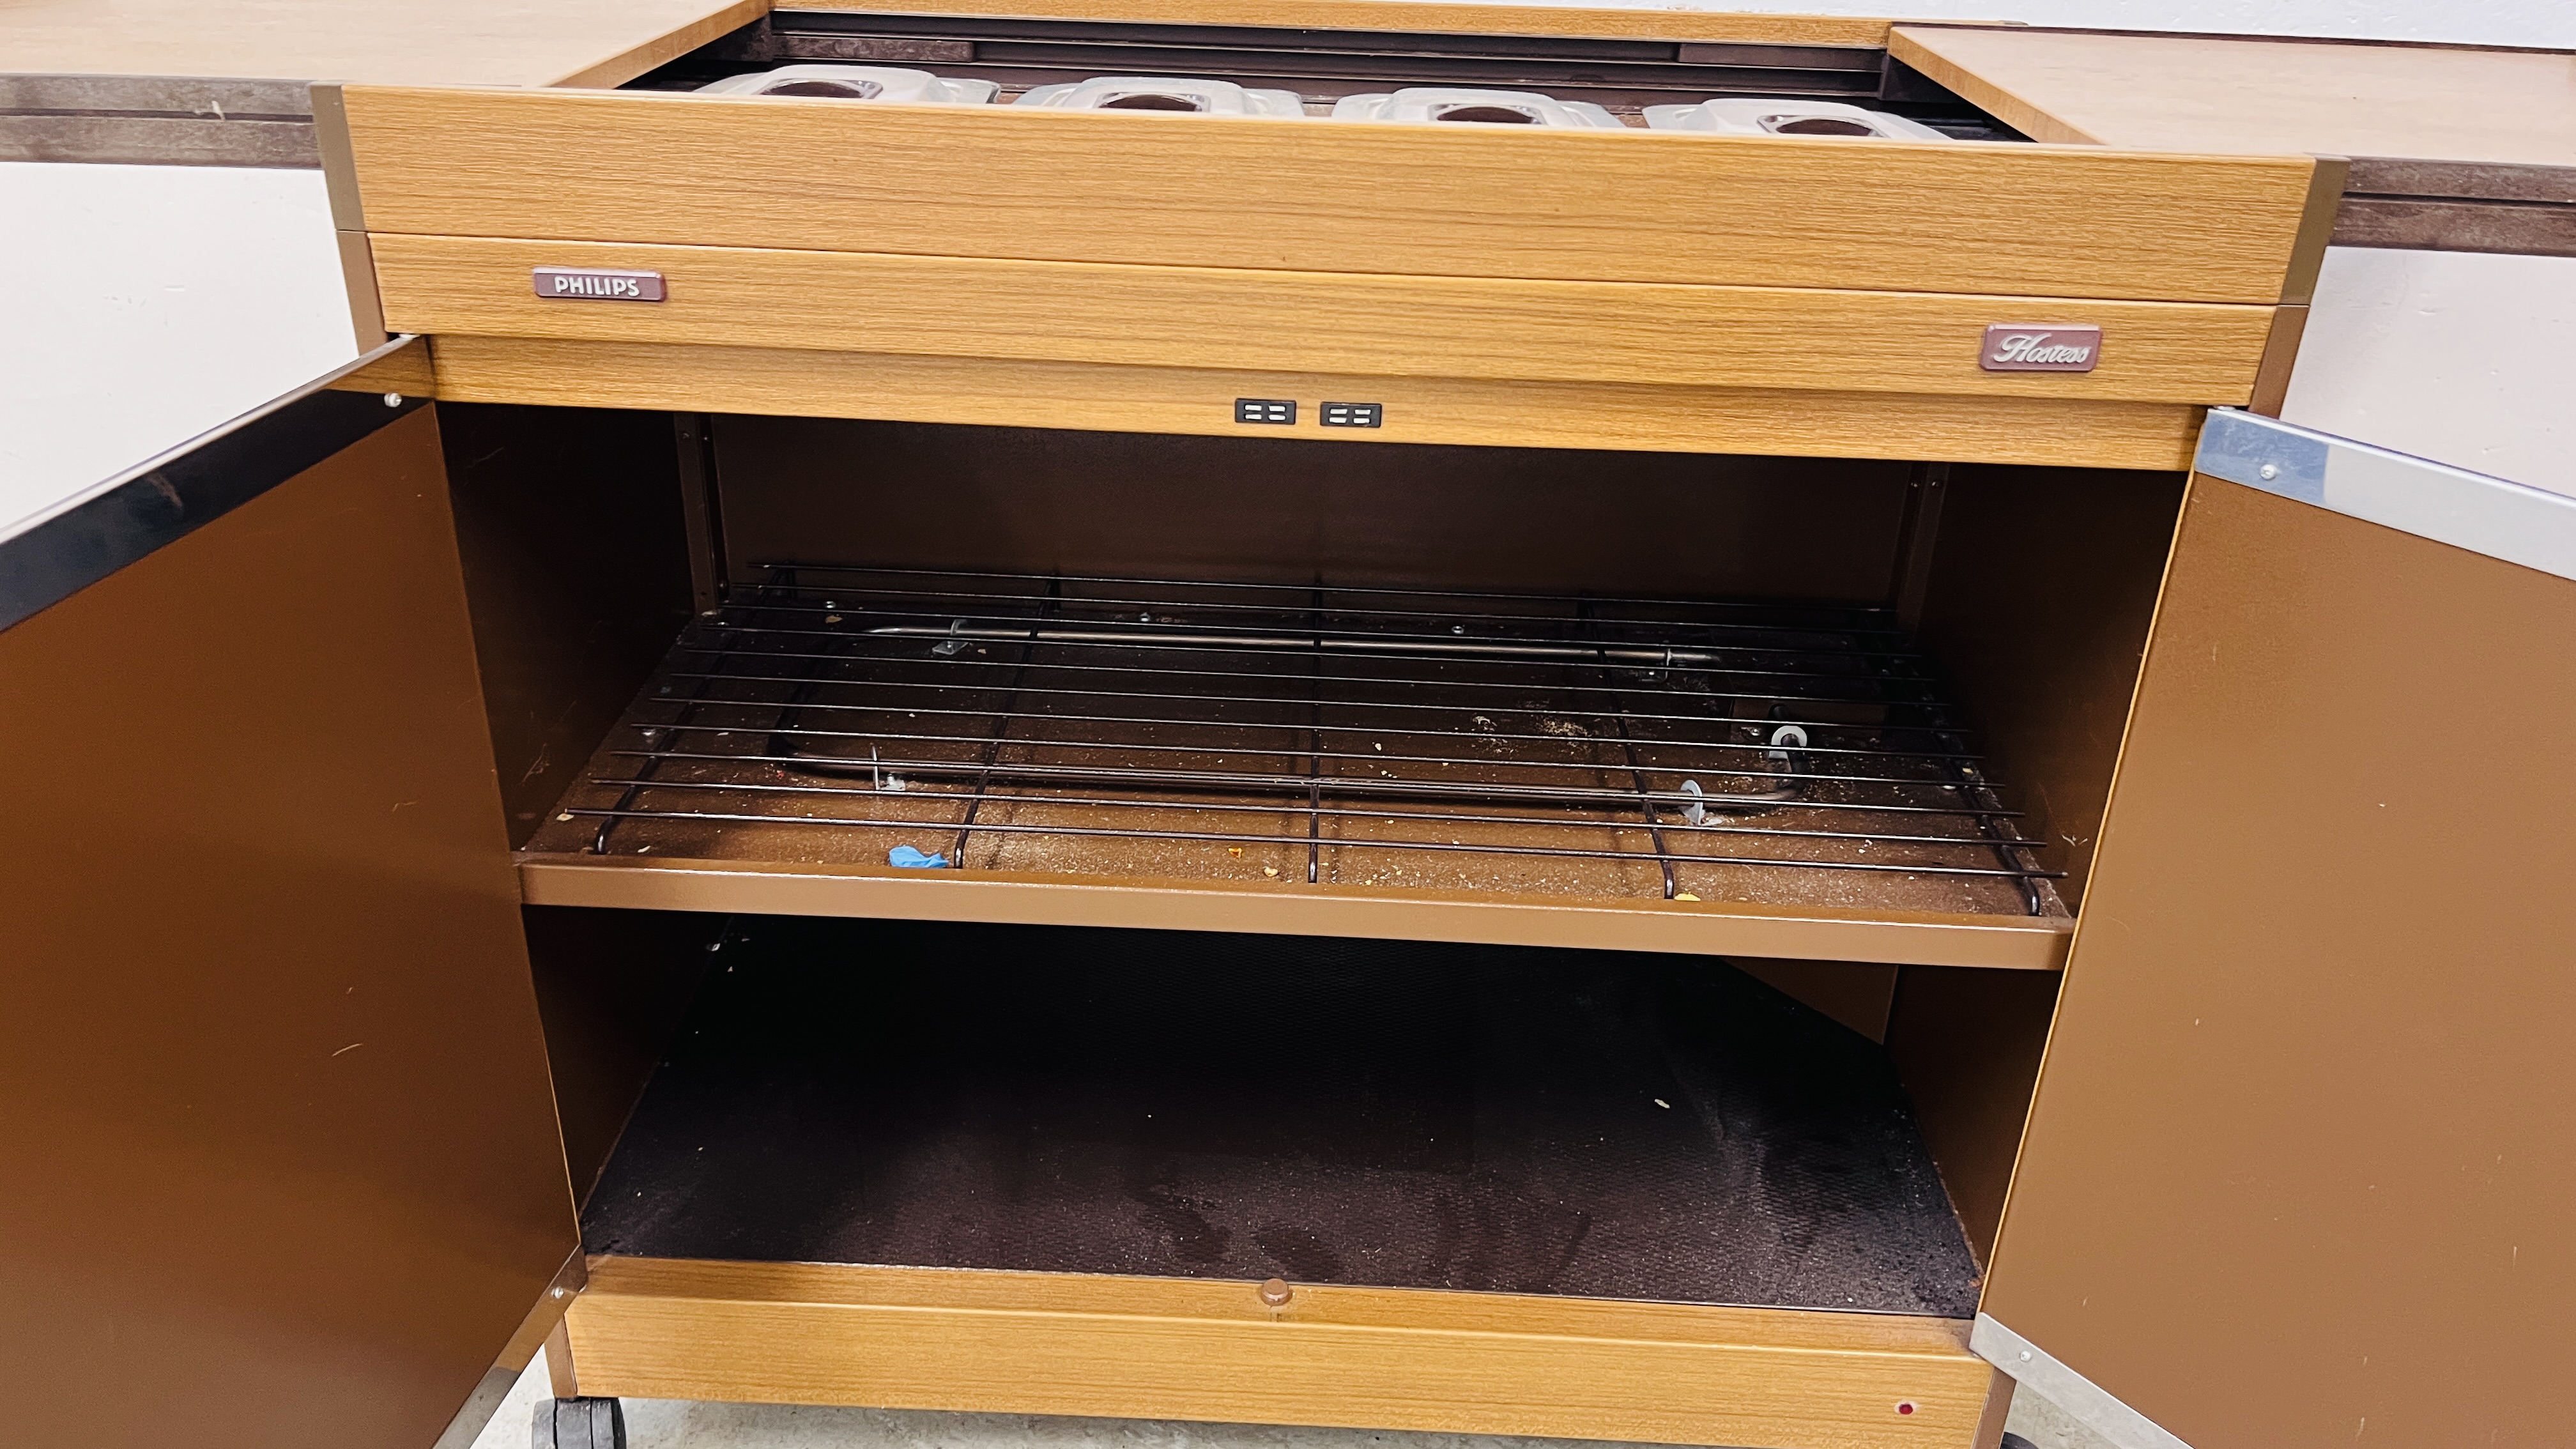 PHILIPS HOSTESS TROLLEY ALONG WITH A PHILIPS HOSTESS 4 SECTION WARMING BUFFET - SOLD AS SEEN. - Image 7 of 7